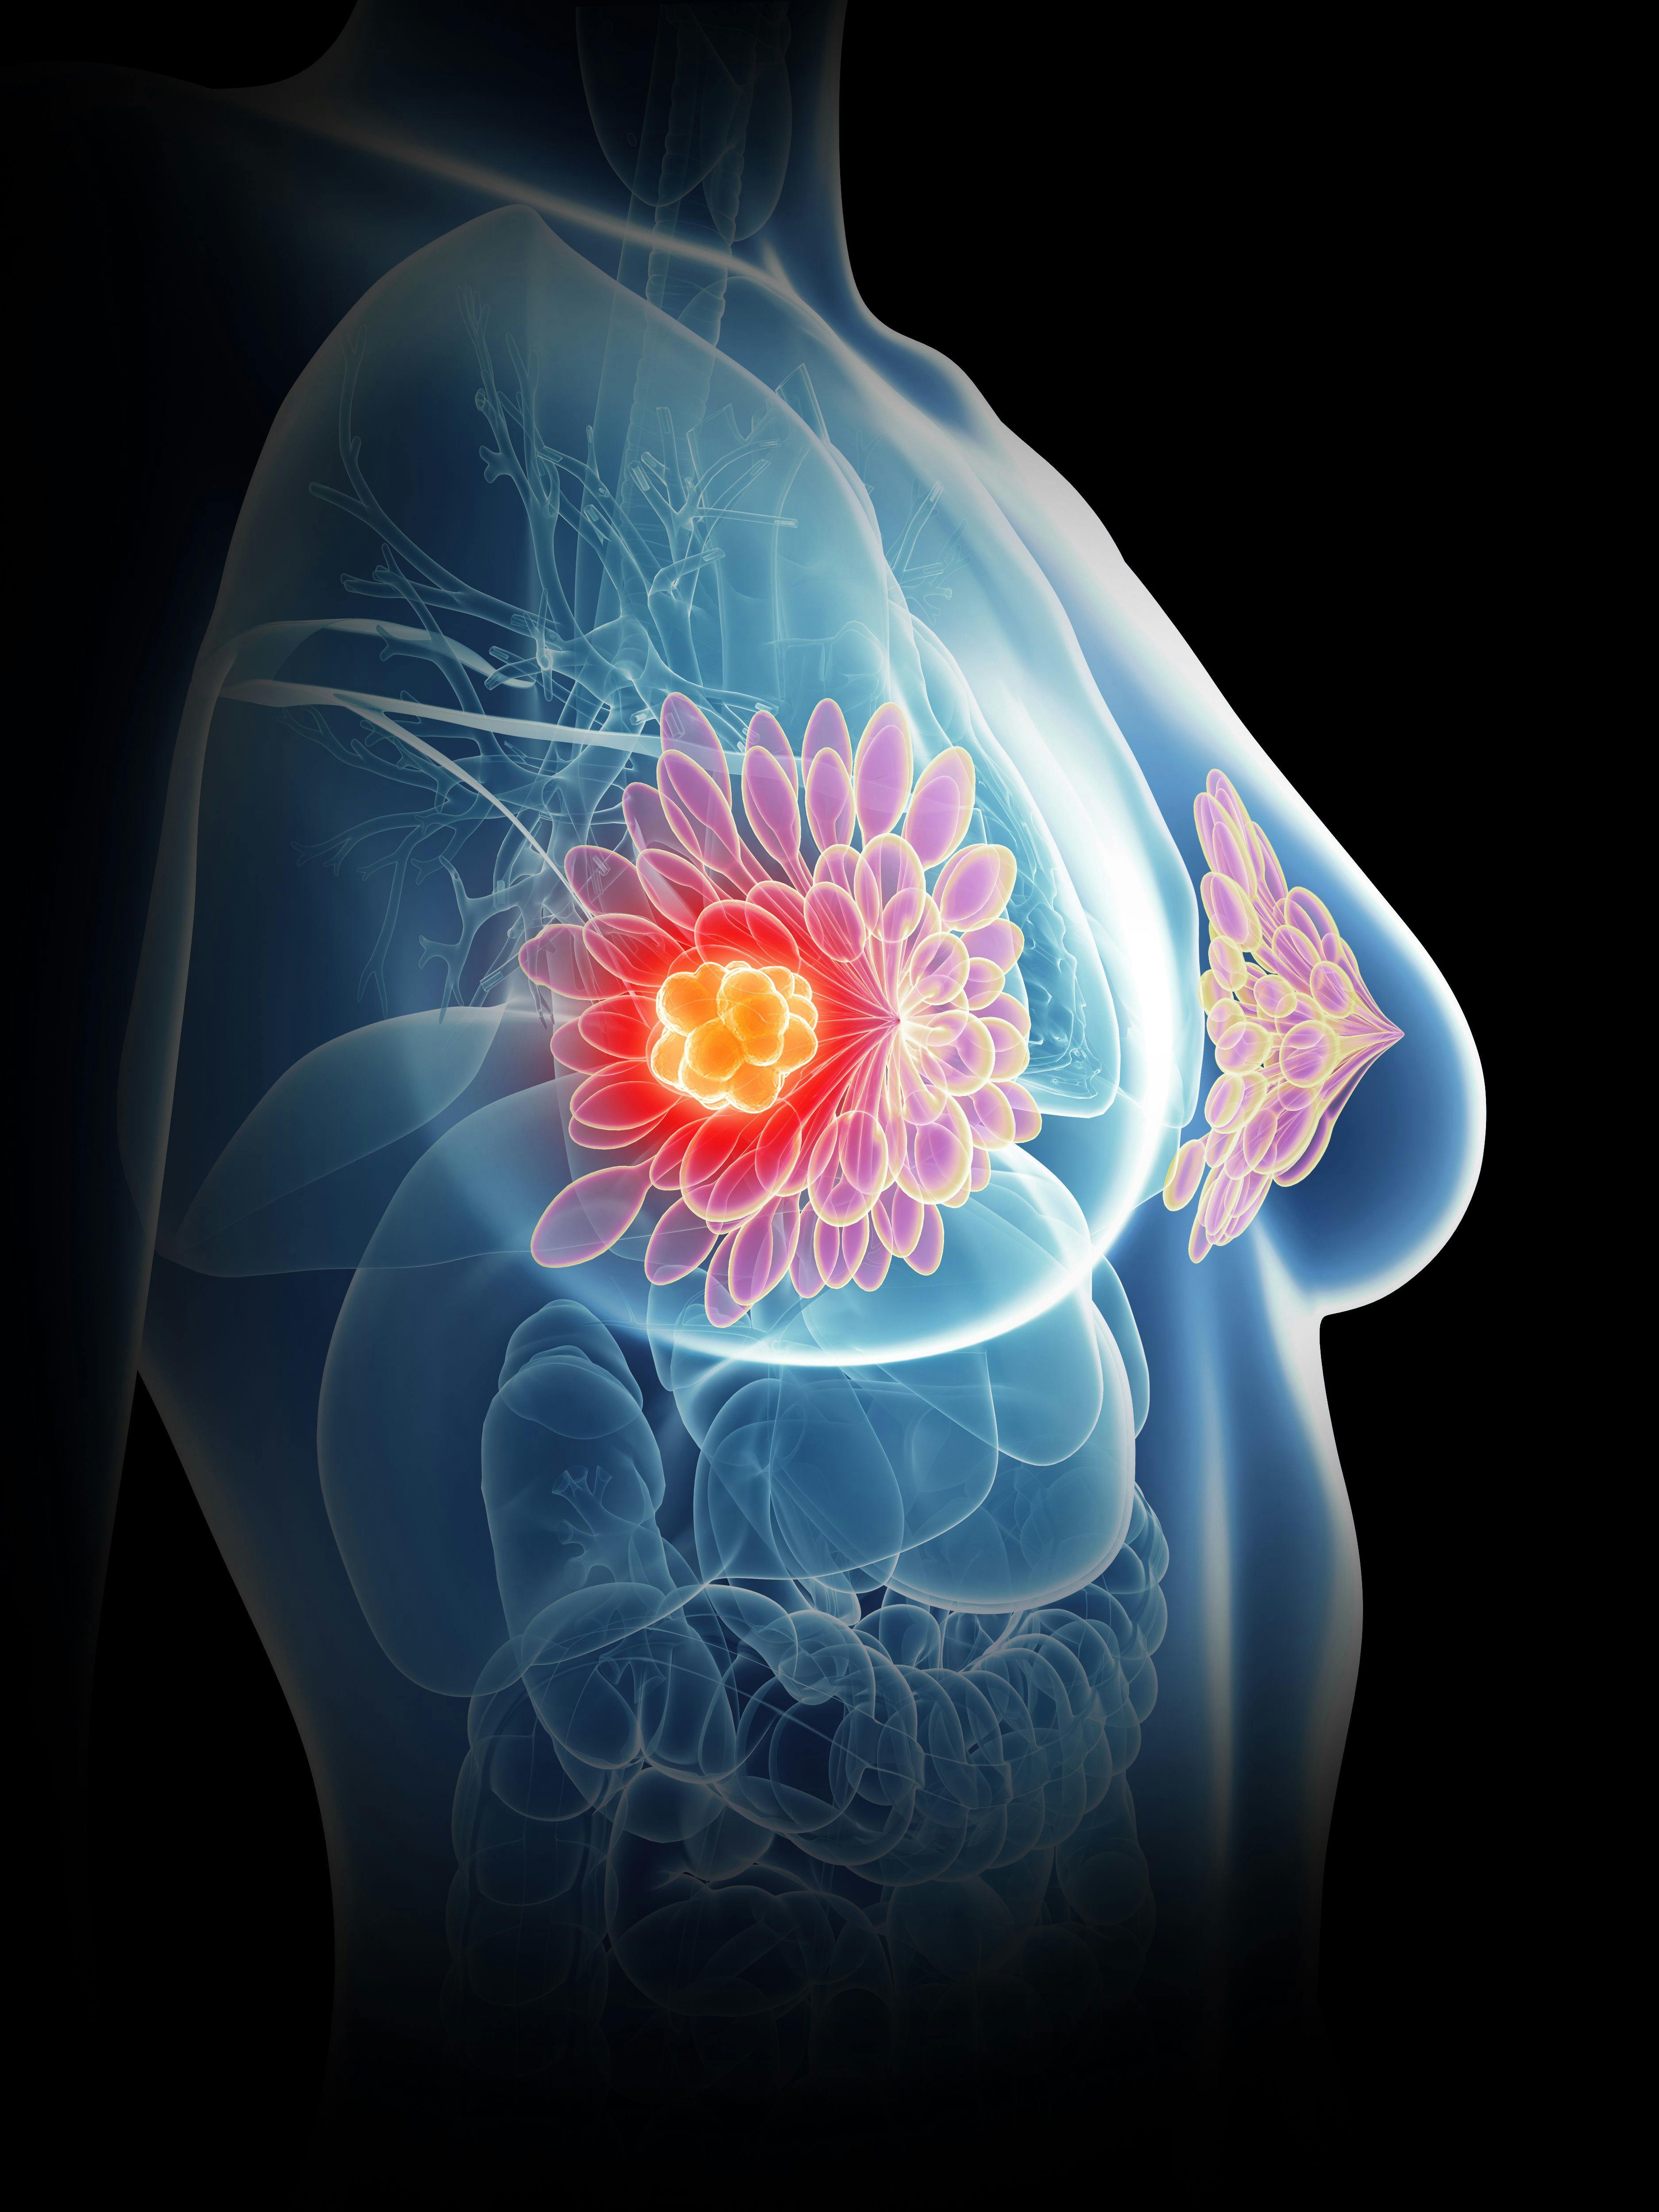 Tucatinib To Be Examined as Add-On to First-Line Maintenance in HER2+ Metastatic Breast Cancer